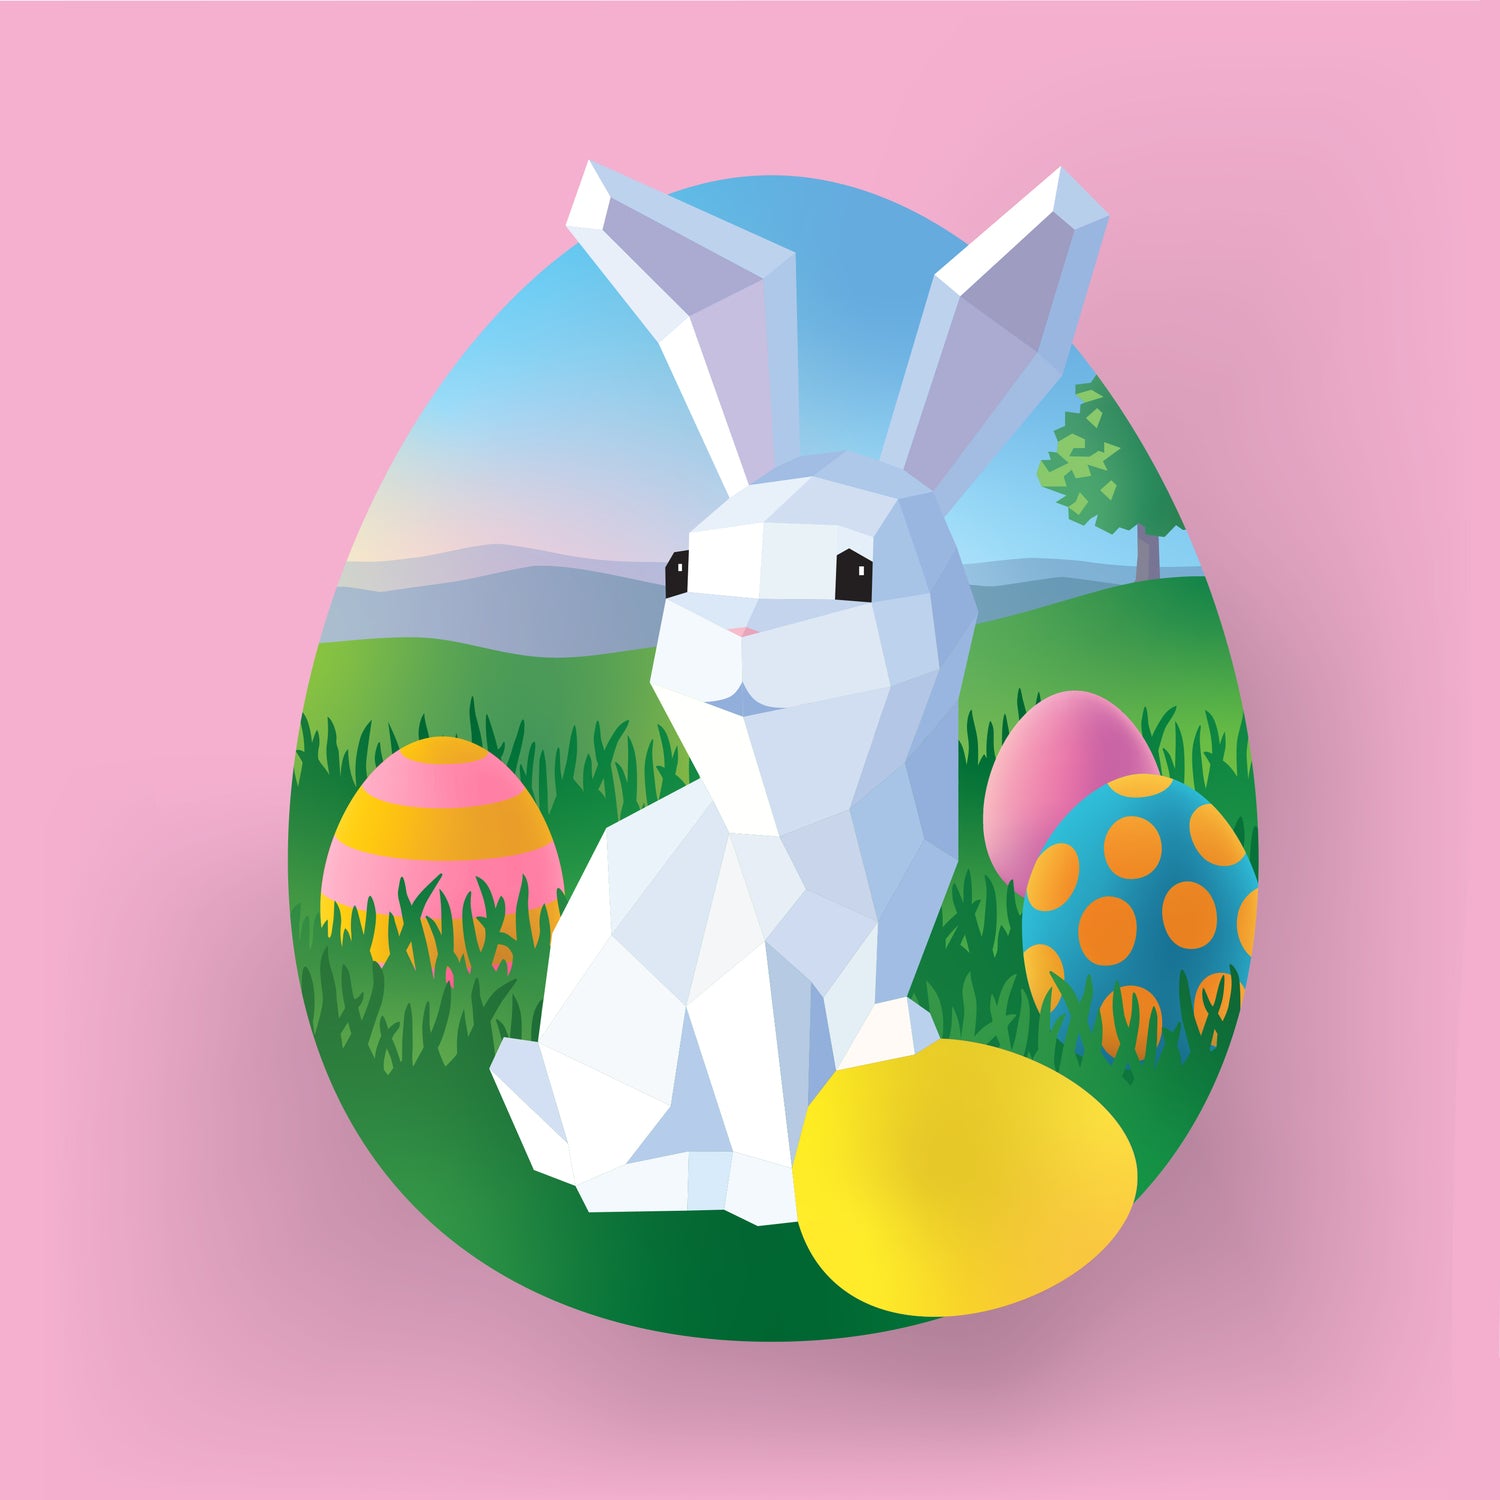 Paint by Sticker Kids: Easter: Create 10 Pictures One Sticker at a Time!